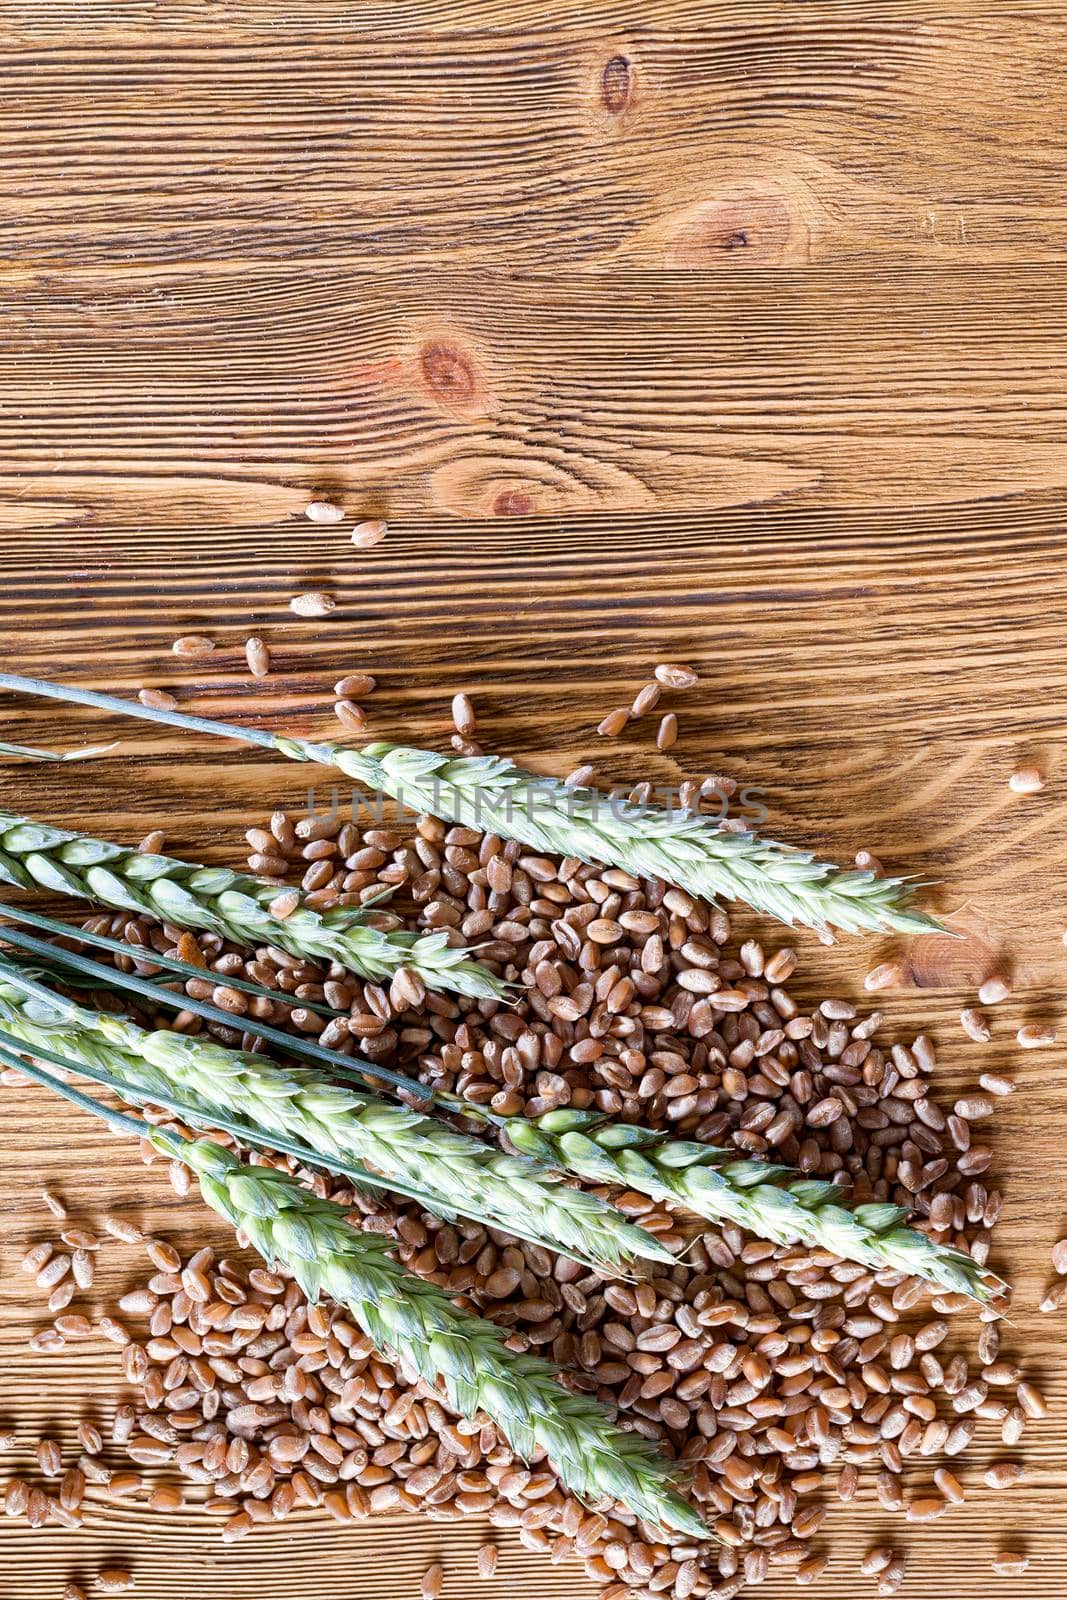 fresh green ears of wheat and a ripe golden grain lying together on an old wooden table, close-up